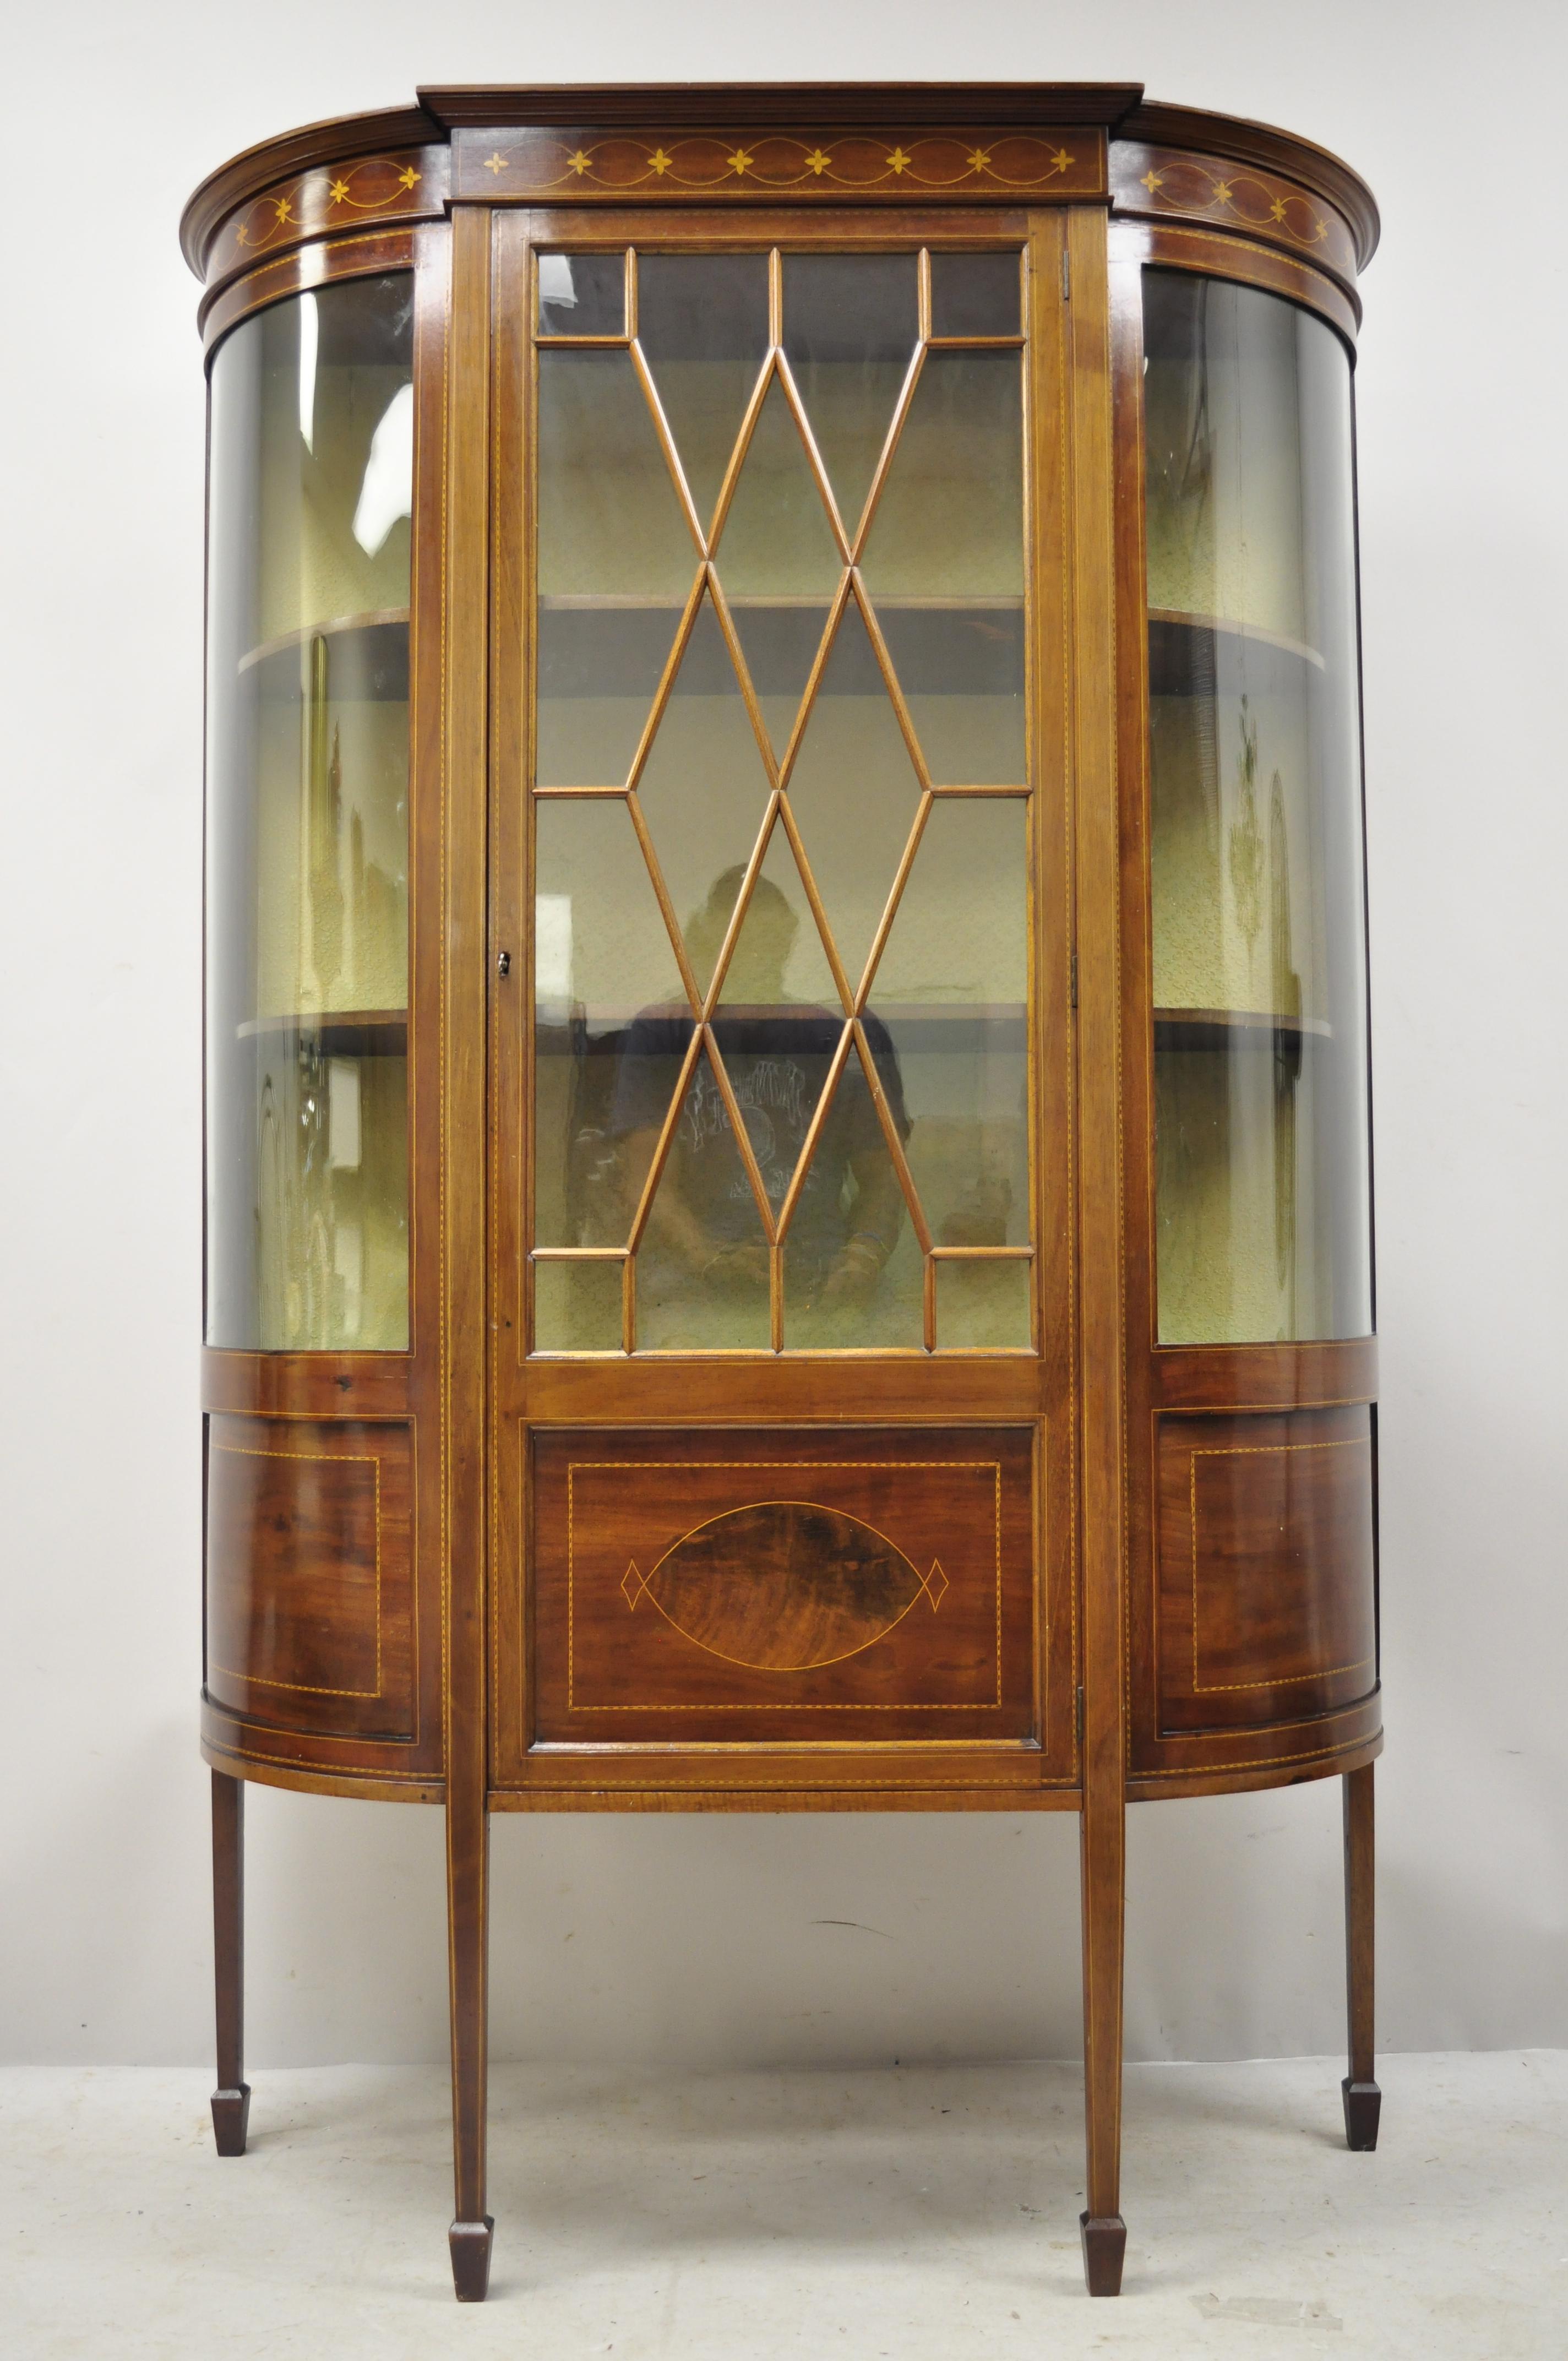 English Edwardian Satinwood Inlay Bowed Curved Glass China Display Cabinet Curio For Sale 5